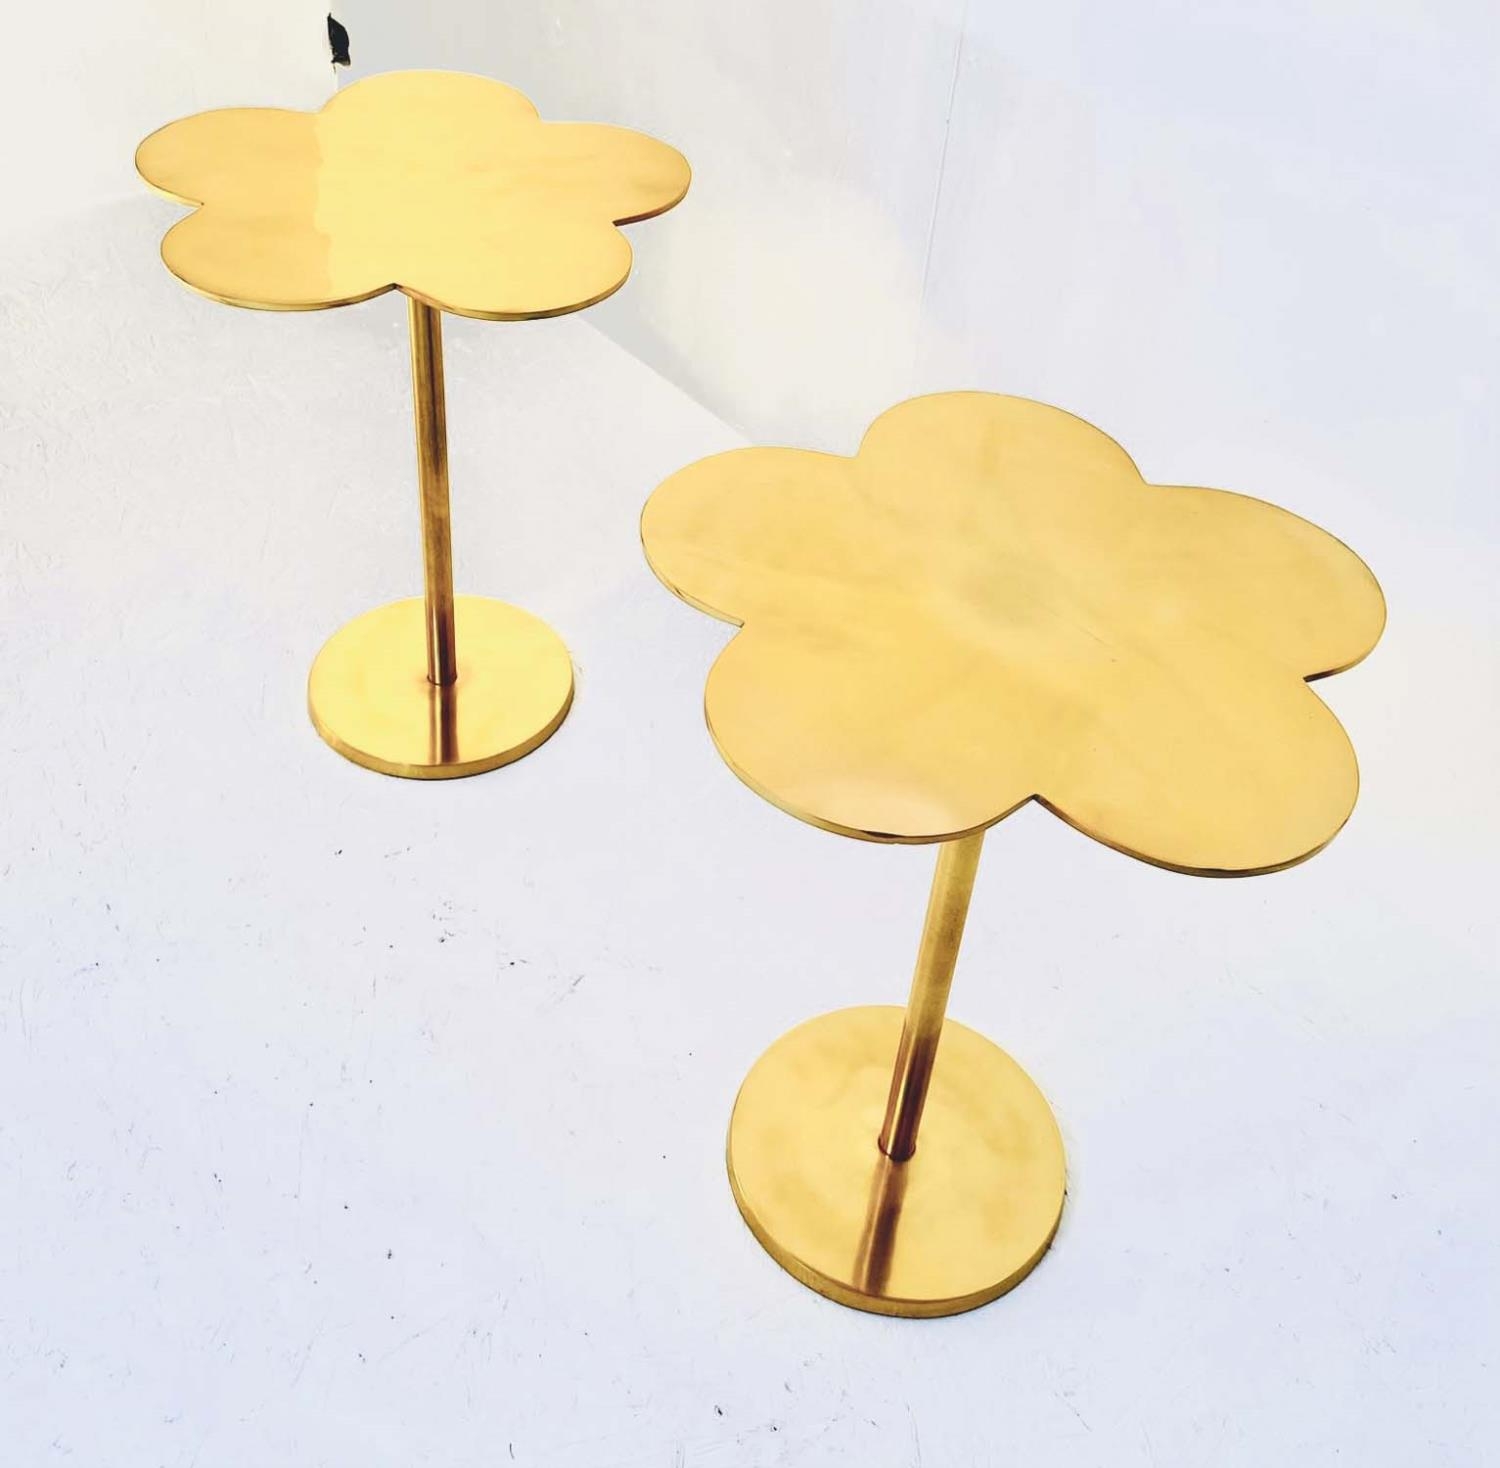 CLOVER SIDE TABLES, a pair, in gilt metal, 51cm H x 41cm x 41cm. (2) - Image 4 of 5